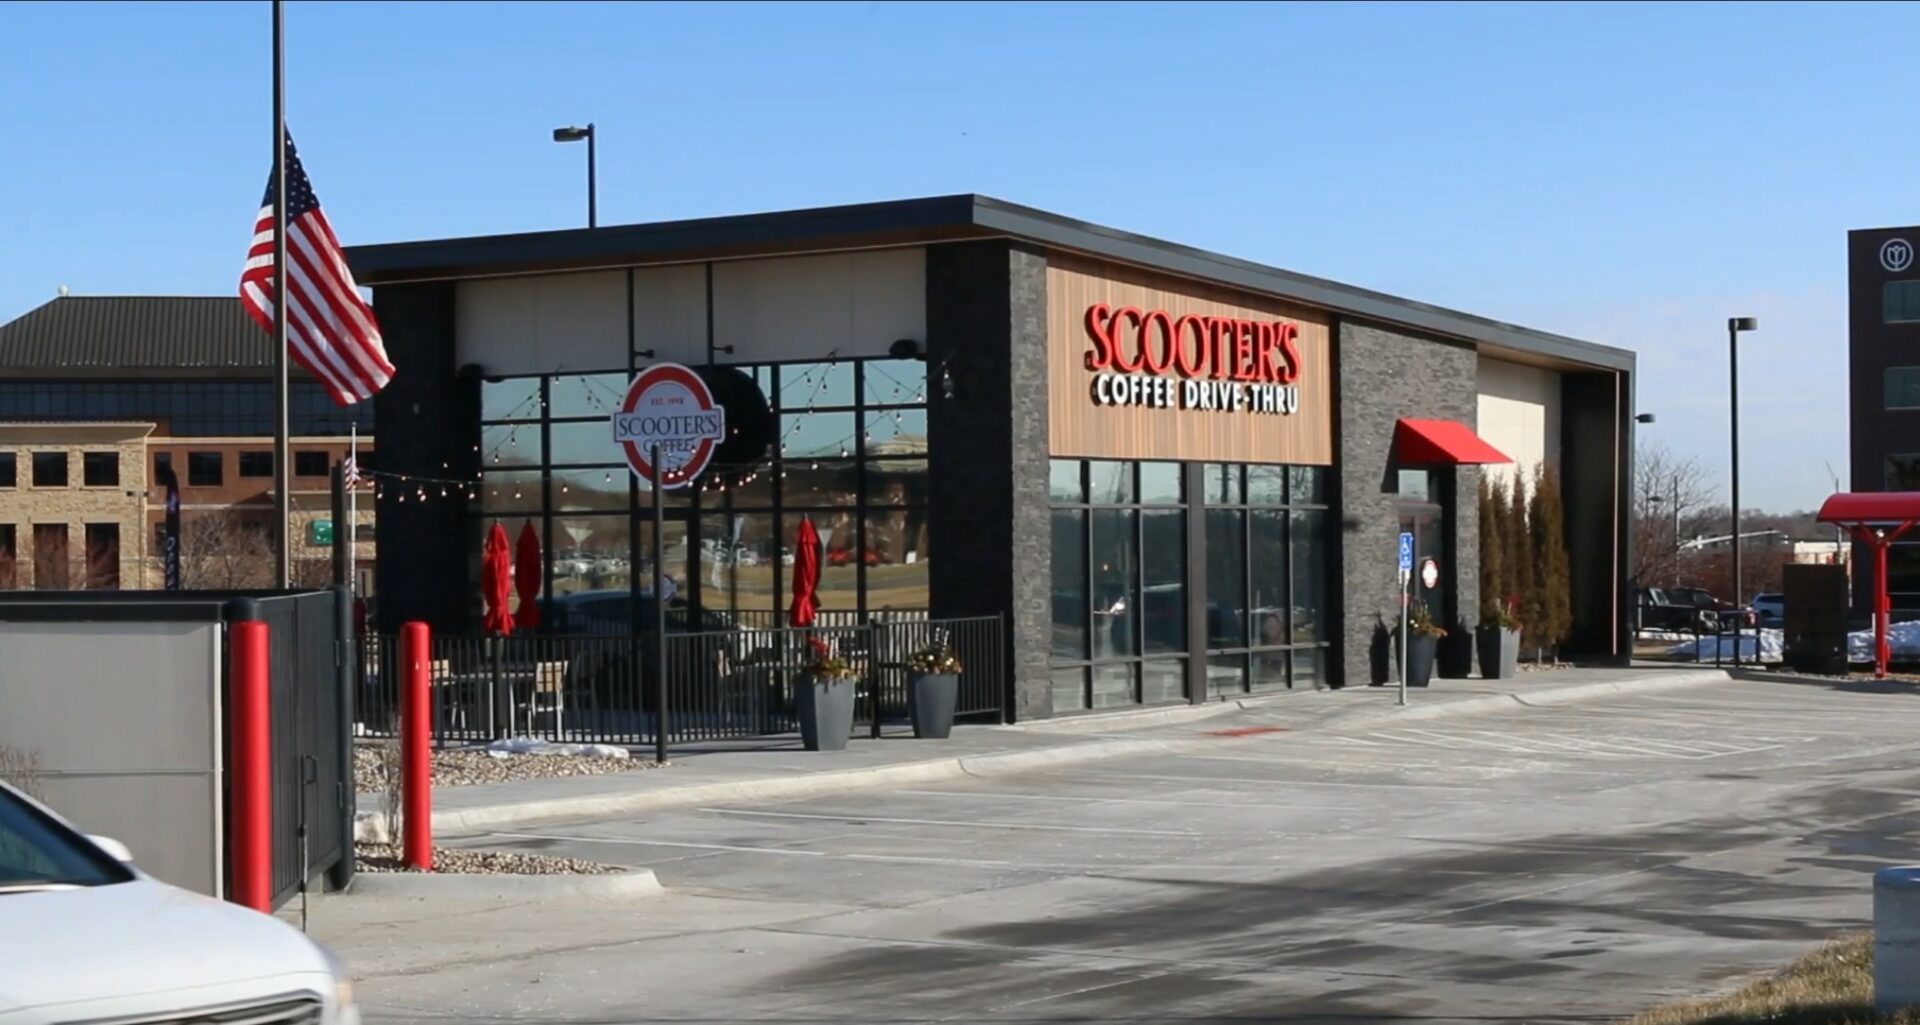 A scooter's coffee drive-thru location.